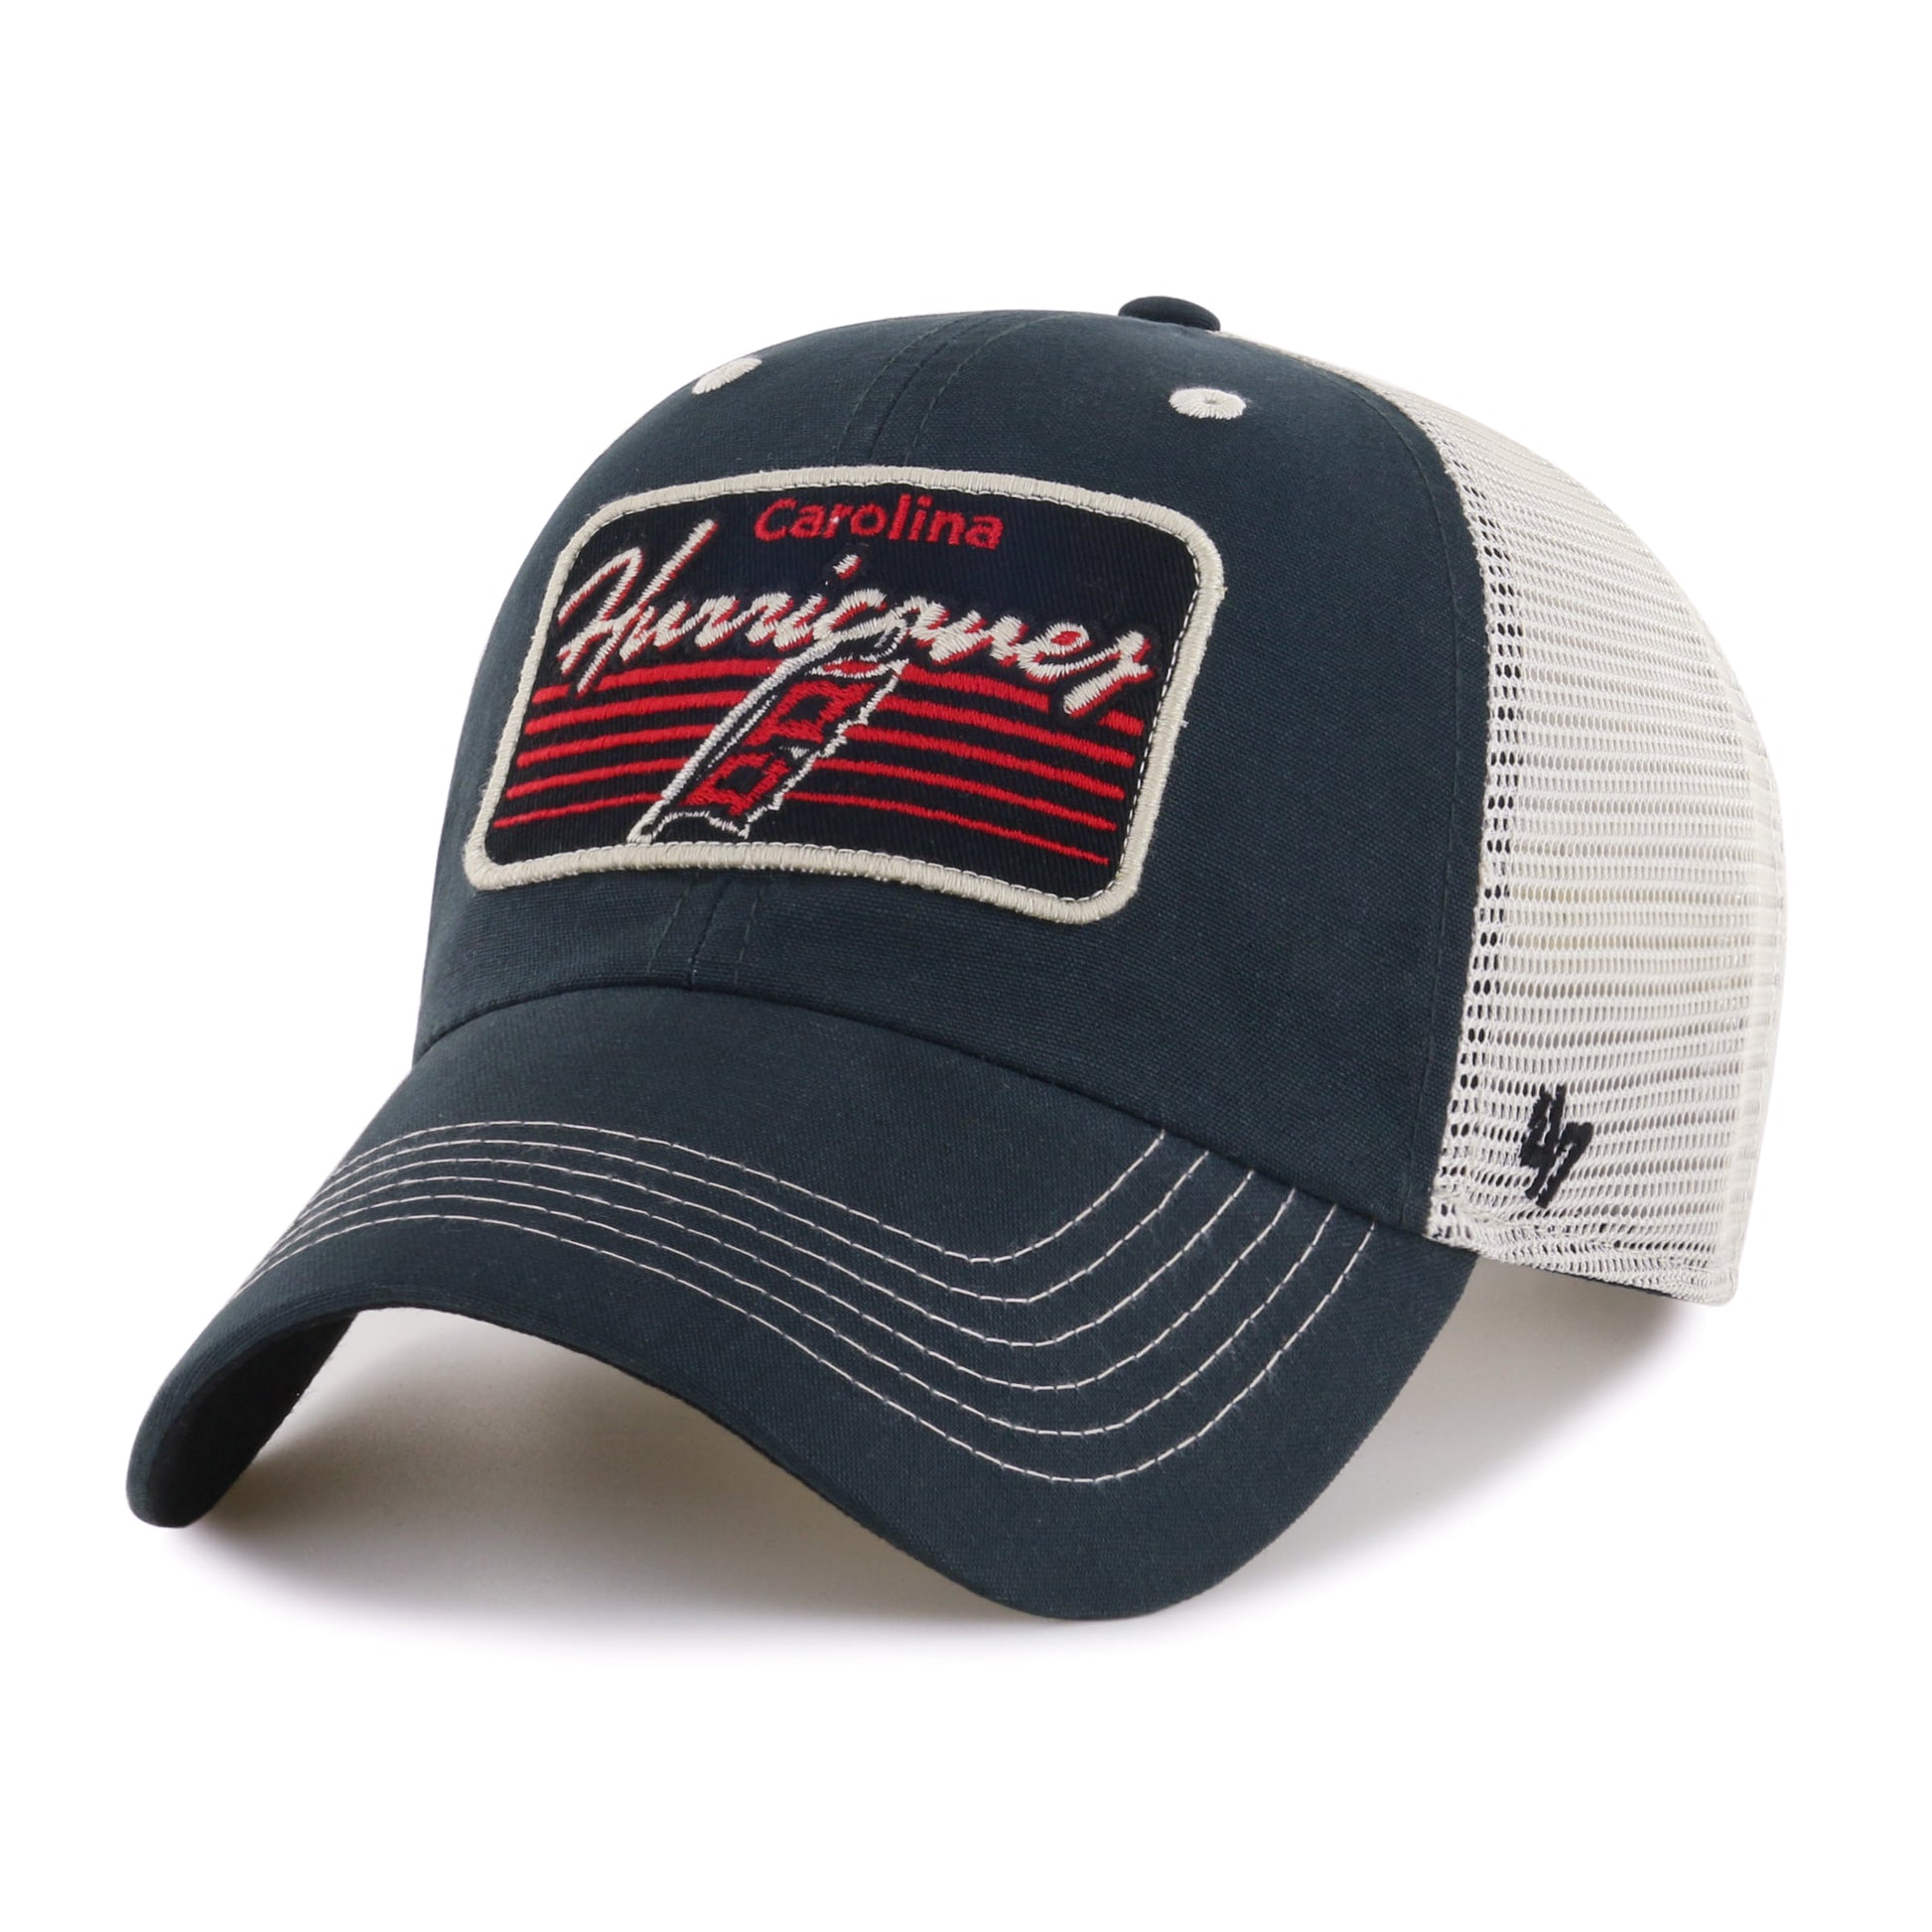 Front: Dark Gray Trucker hat with black Carolina Hurricanes patch and cream meshback